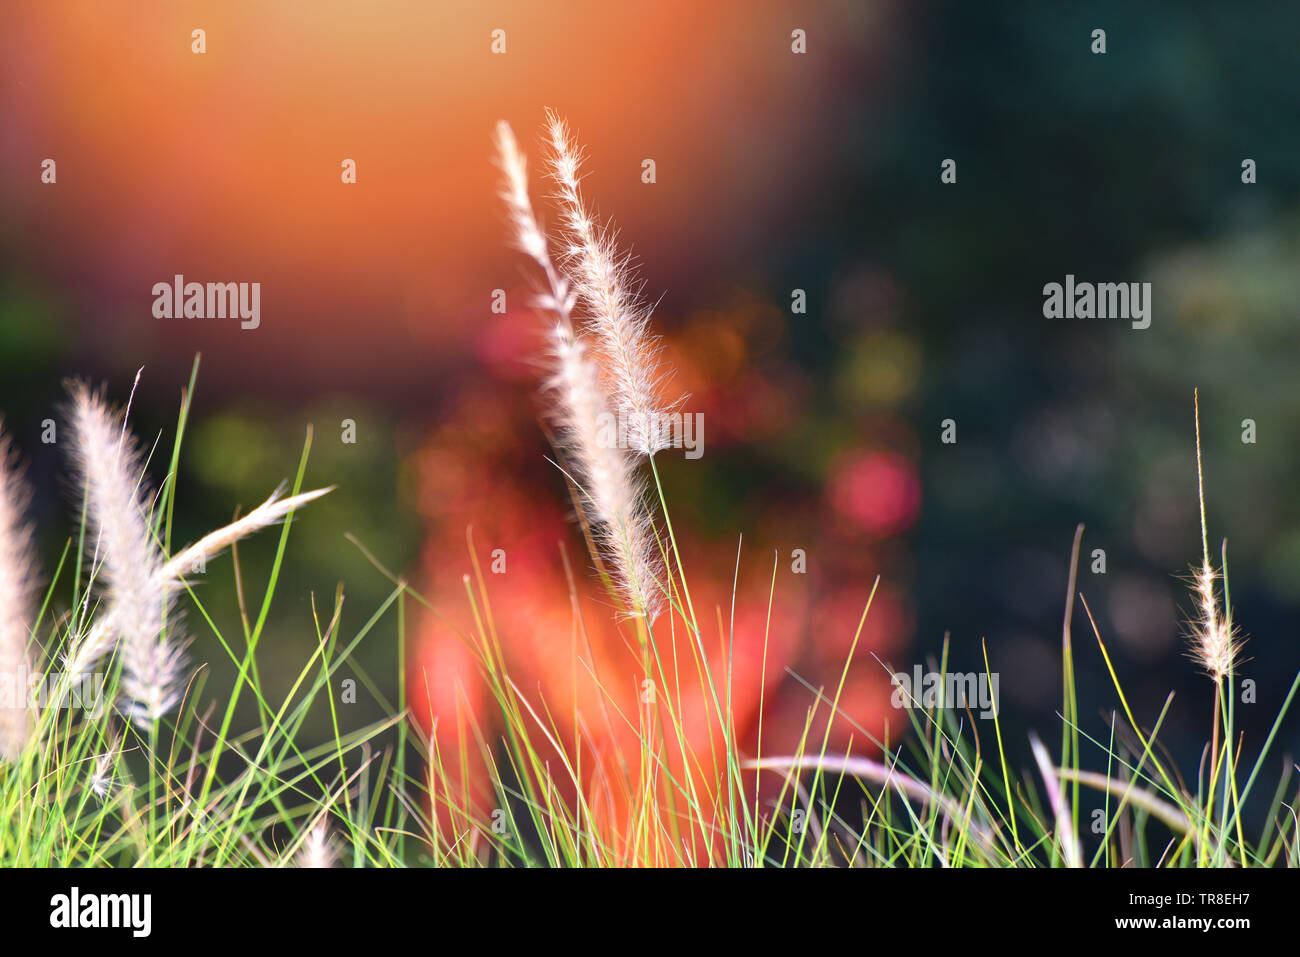 Pennisetum white flower grass meadow in the garden park and sunset background Stock Photo